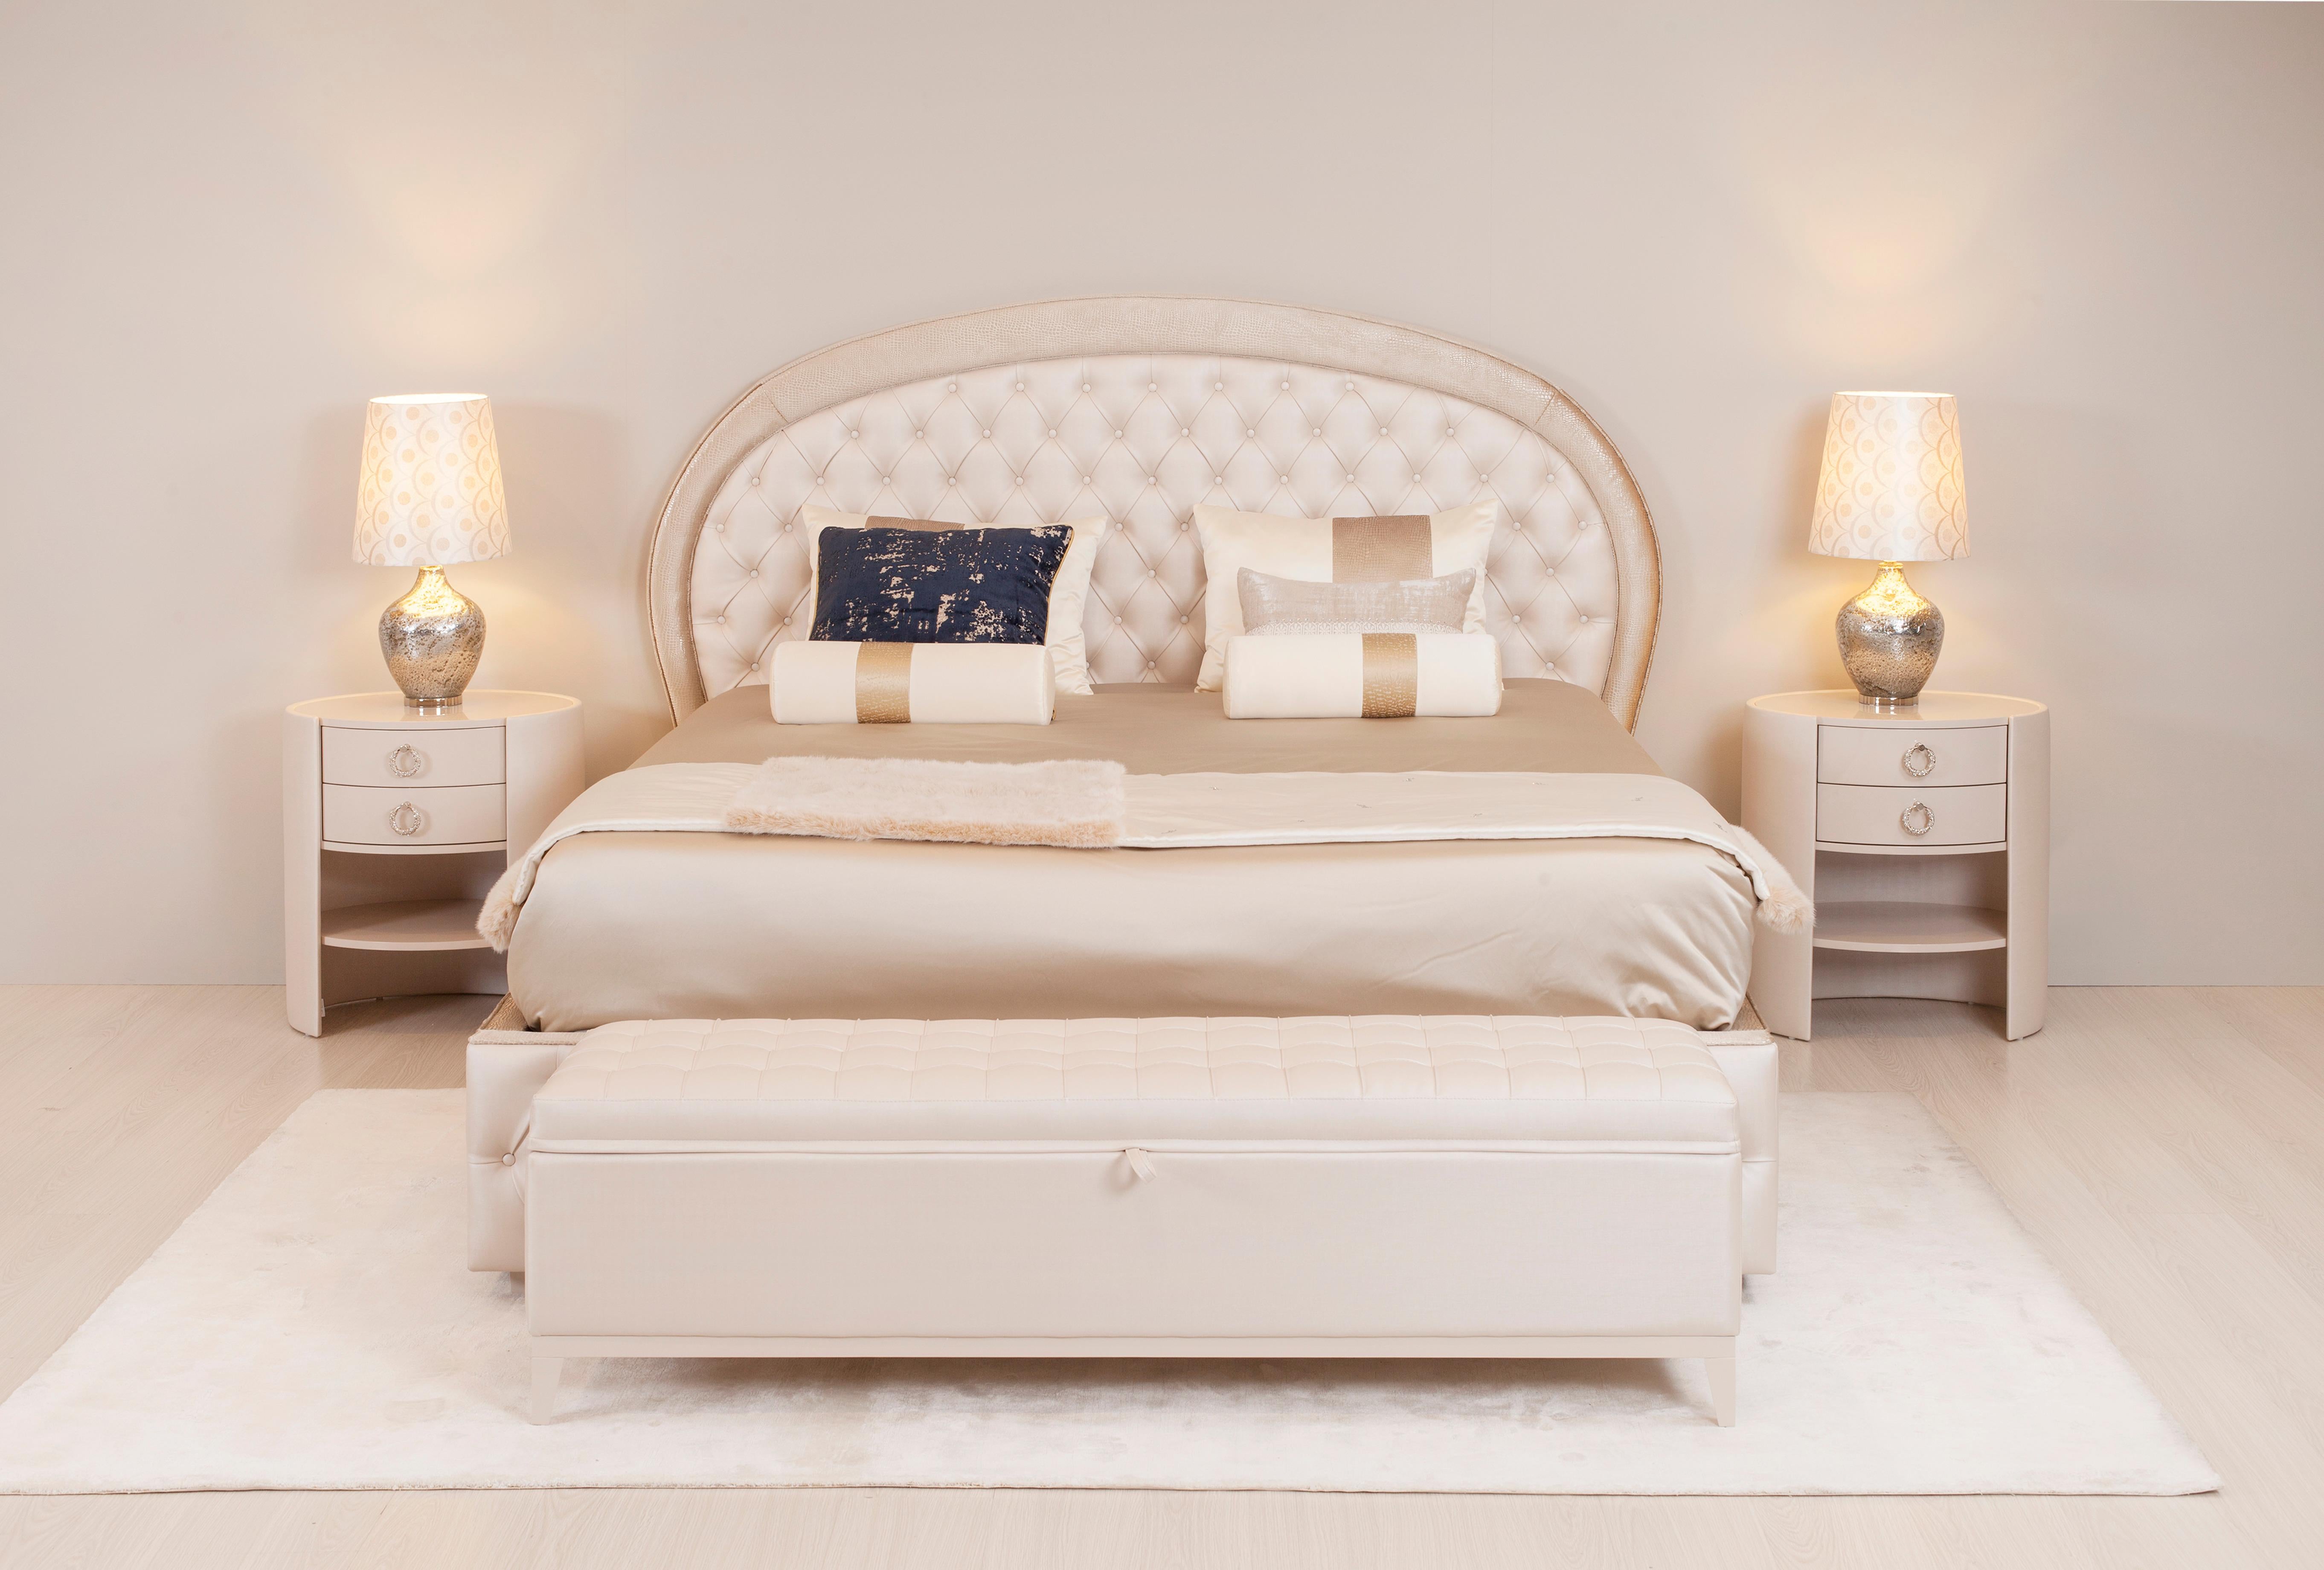 Madal Bed, Modern Collection, Handcrafted in Portugal - Europe by GF Modern.

Madal is an elegant bed with a cover in pearlescent faux leather with capitonnè effect. It has been designed to combine modern comfort with elegant details.

The beige